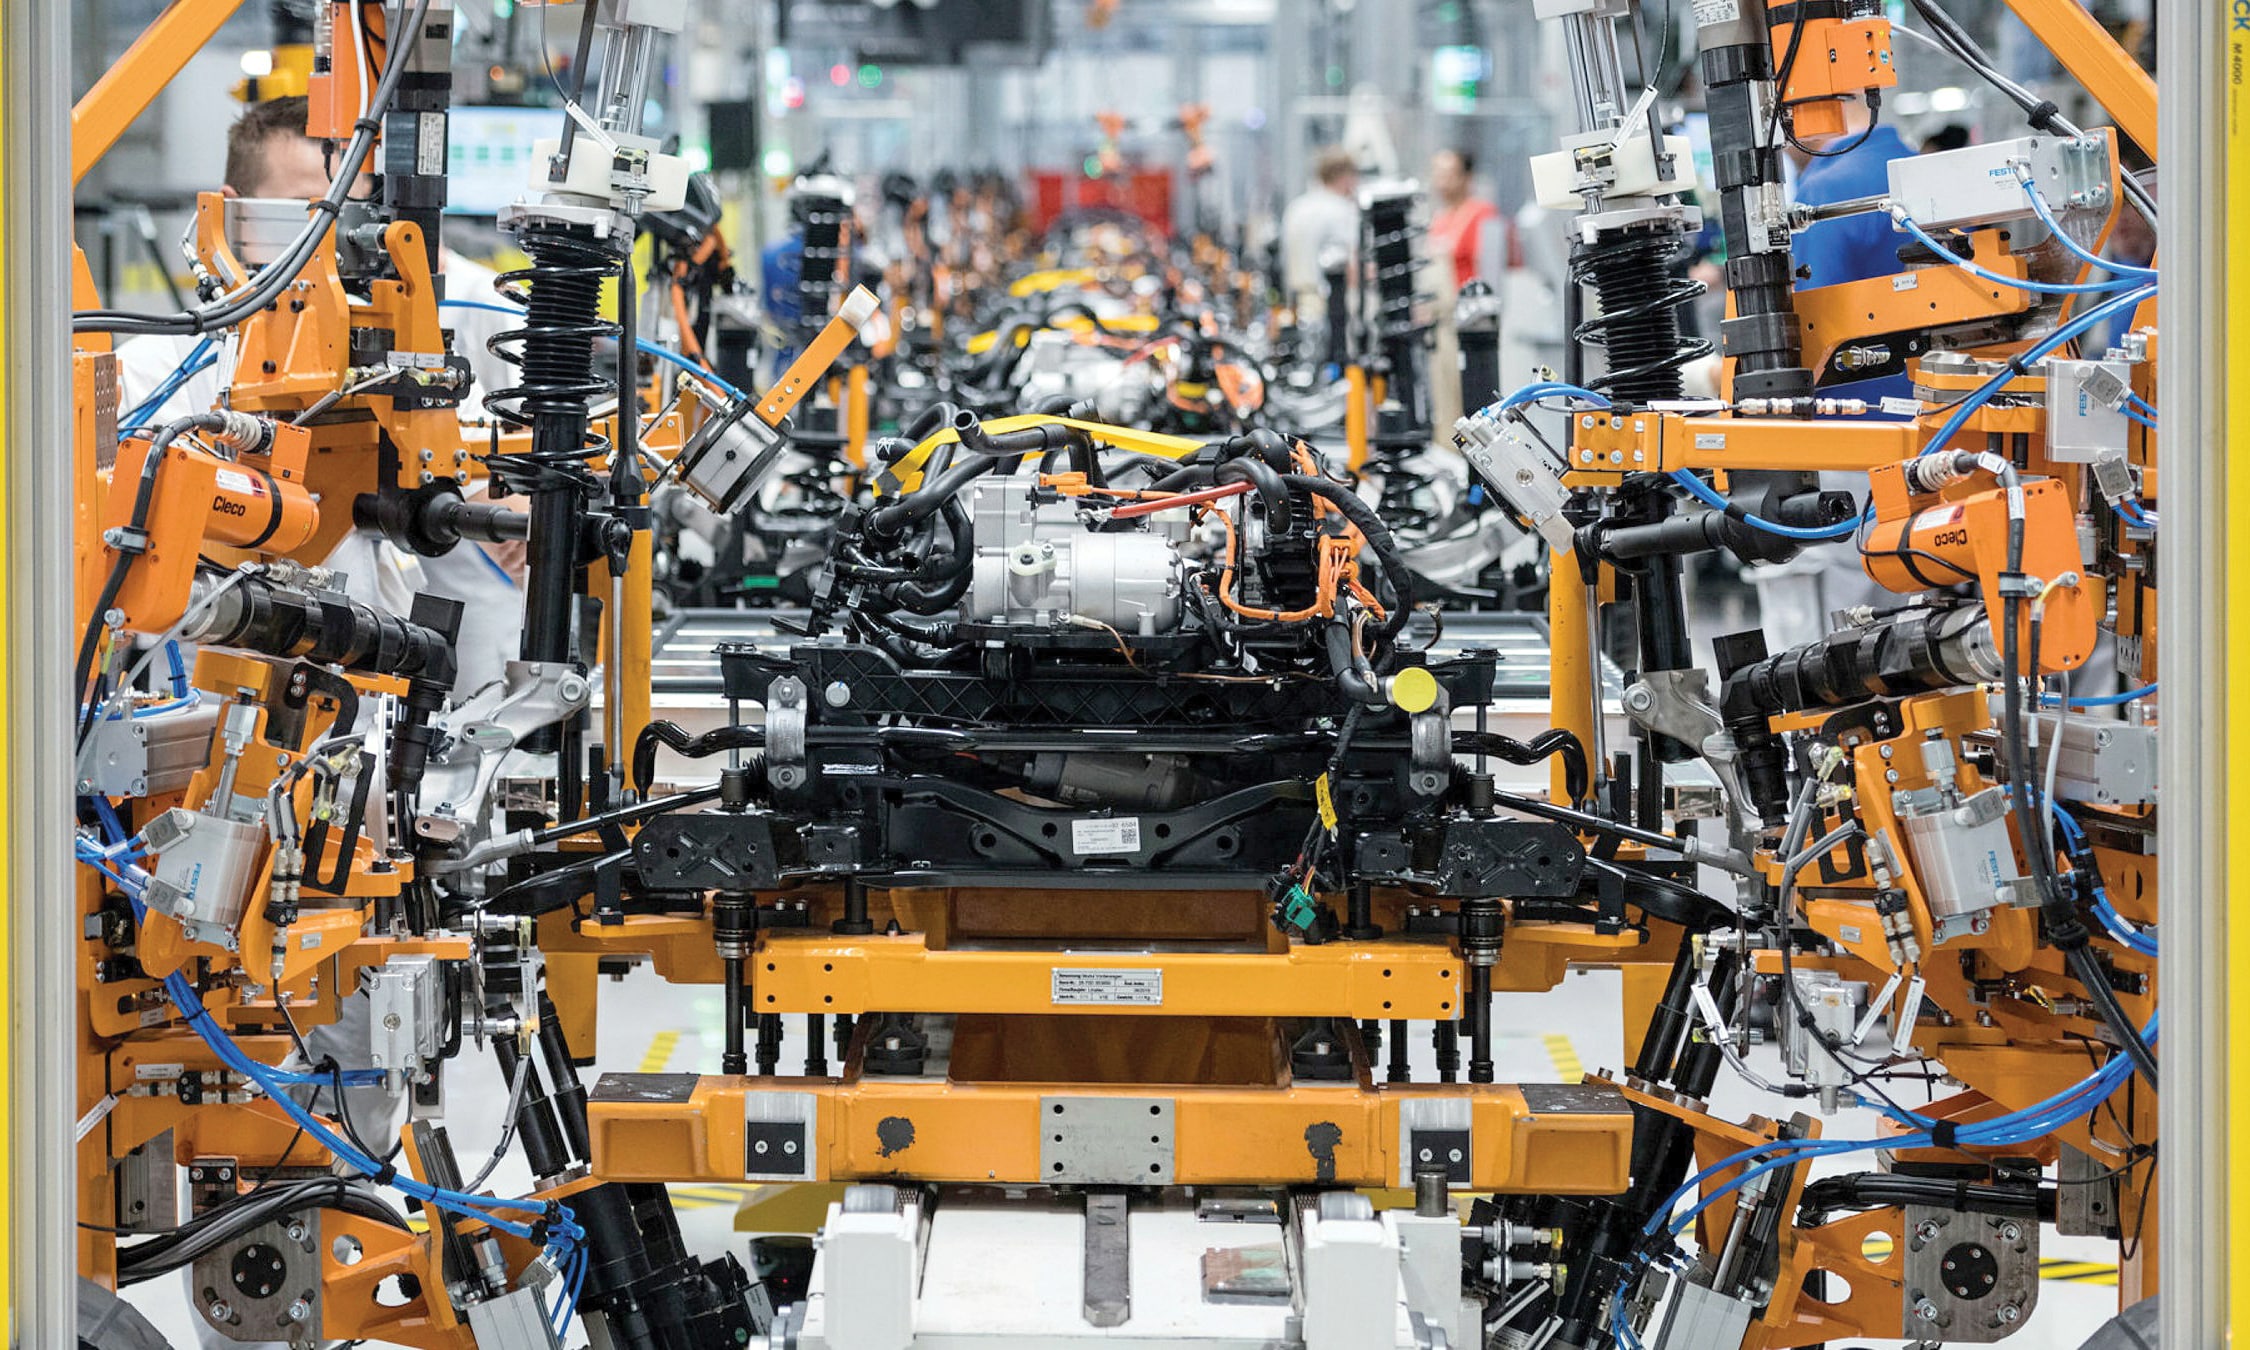 The production line at a Volkswagen factory in Zwickau. German industry had already been suffering from the effects of global trade tensions before the pandemic.